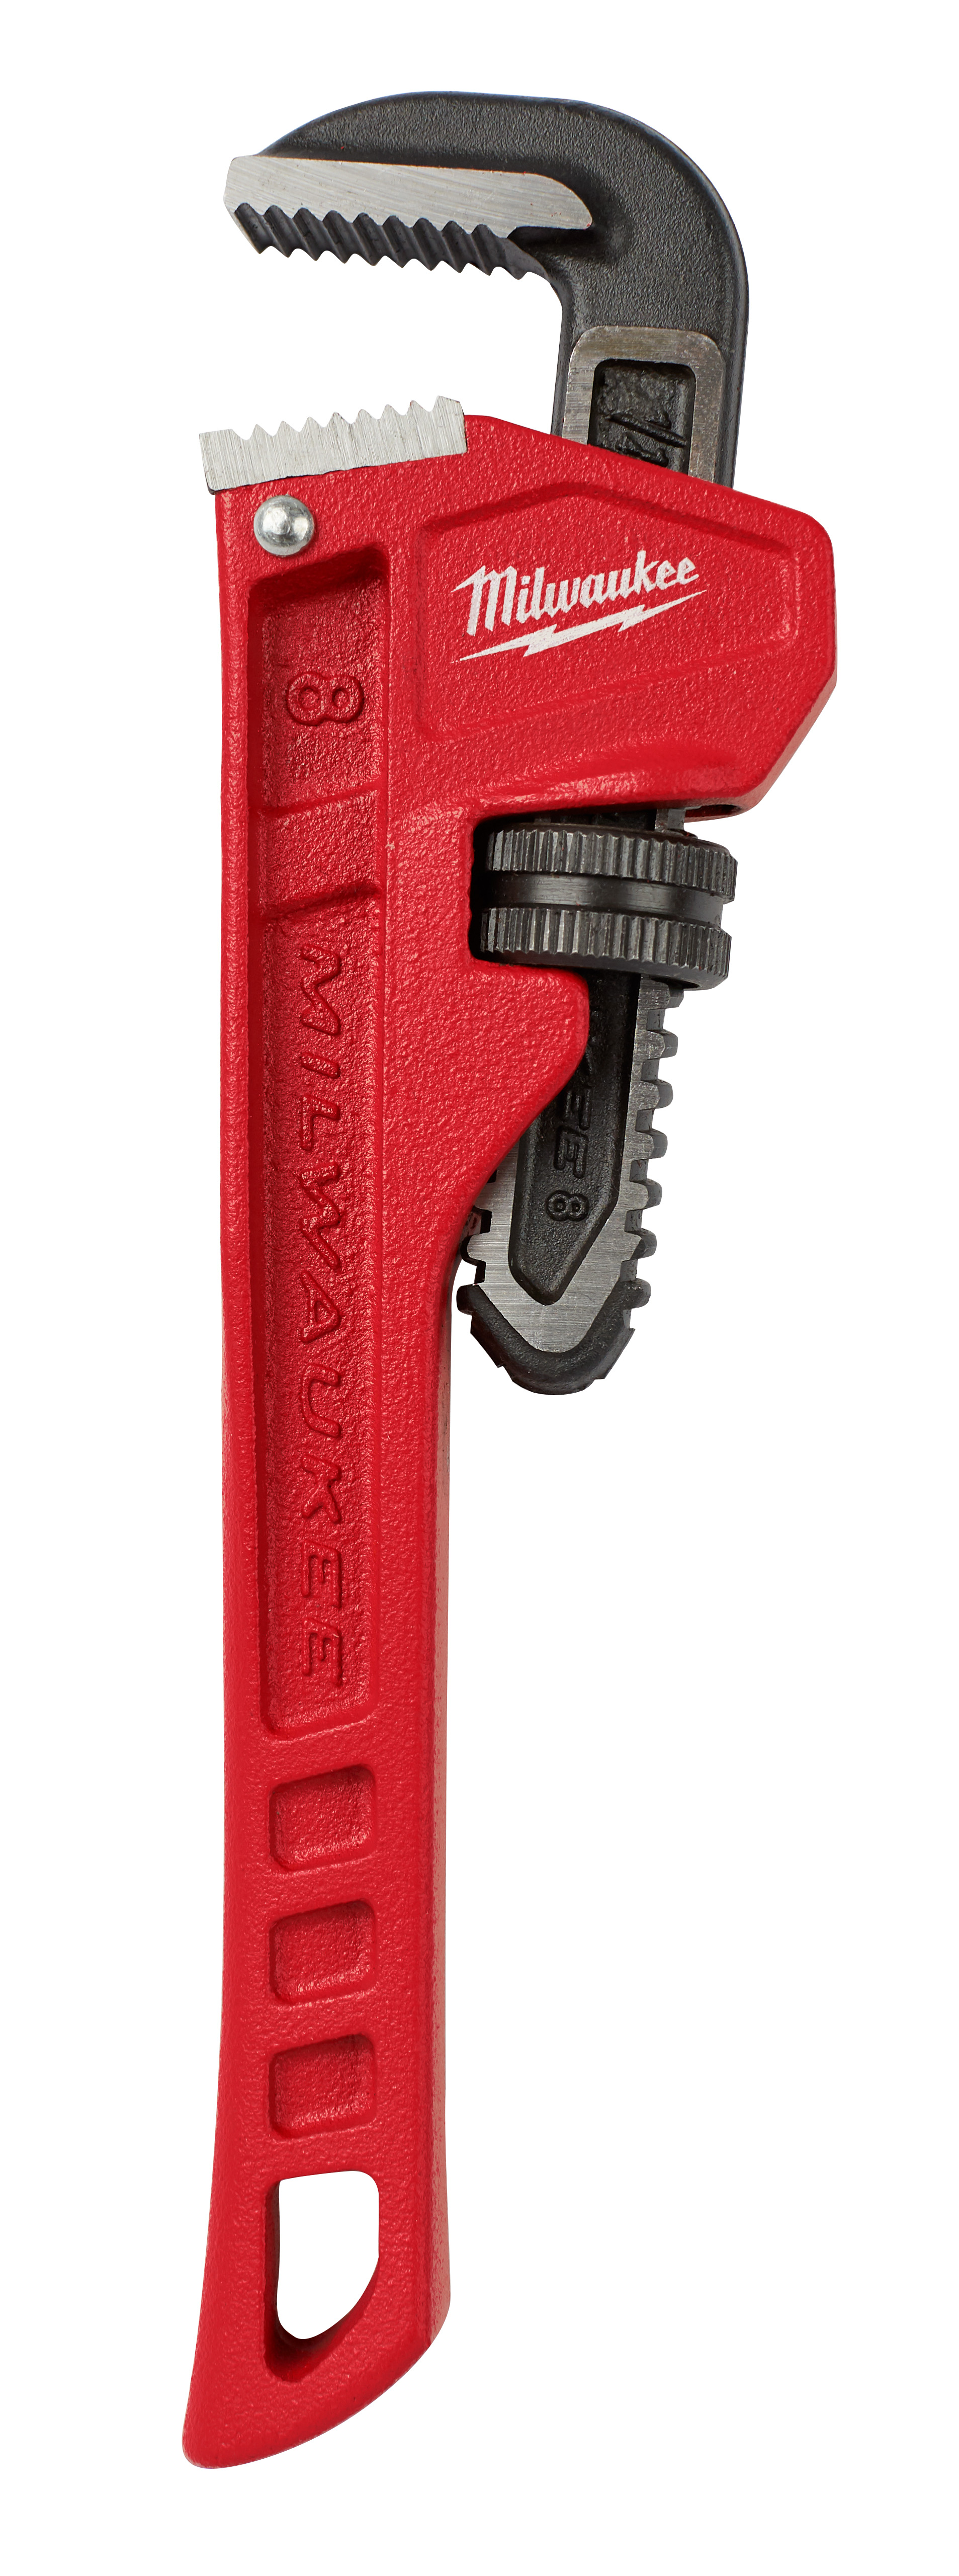 8 in. Pipe Wrench